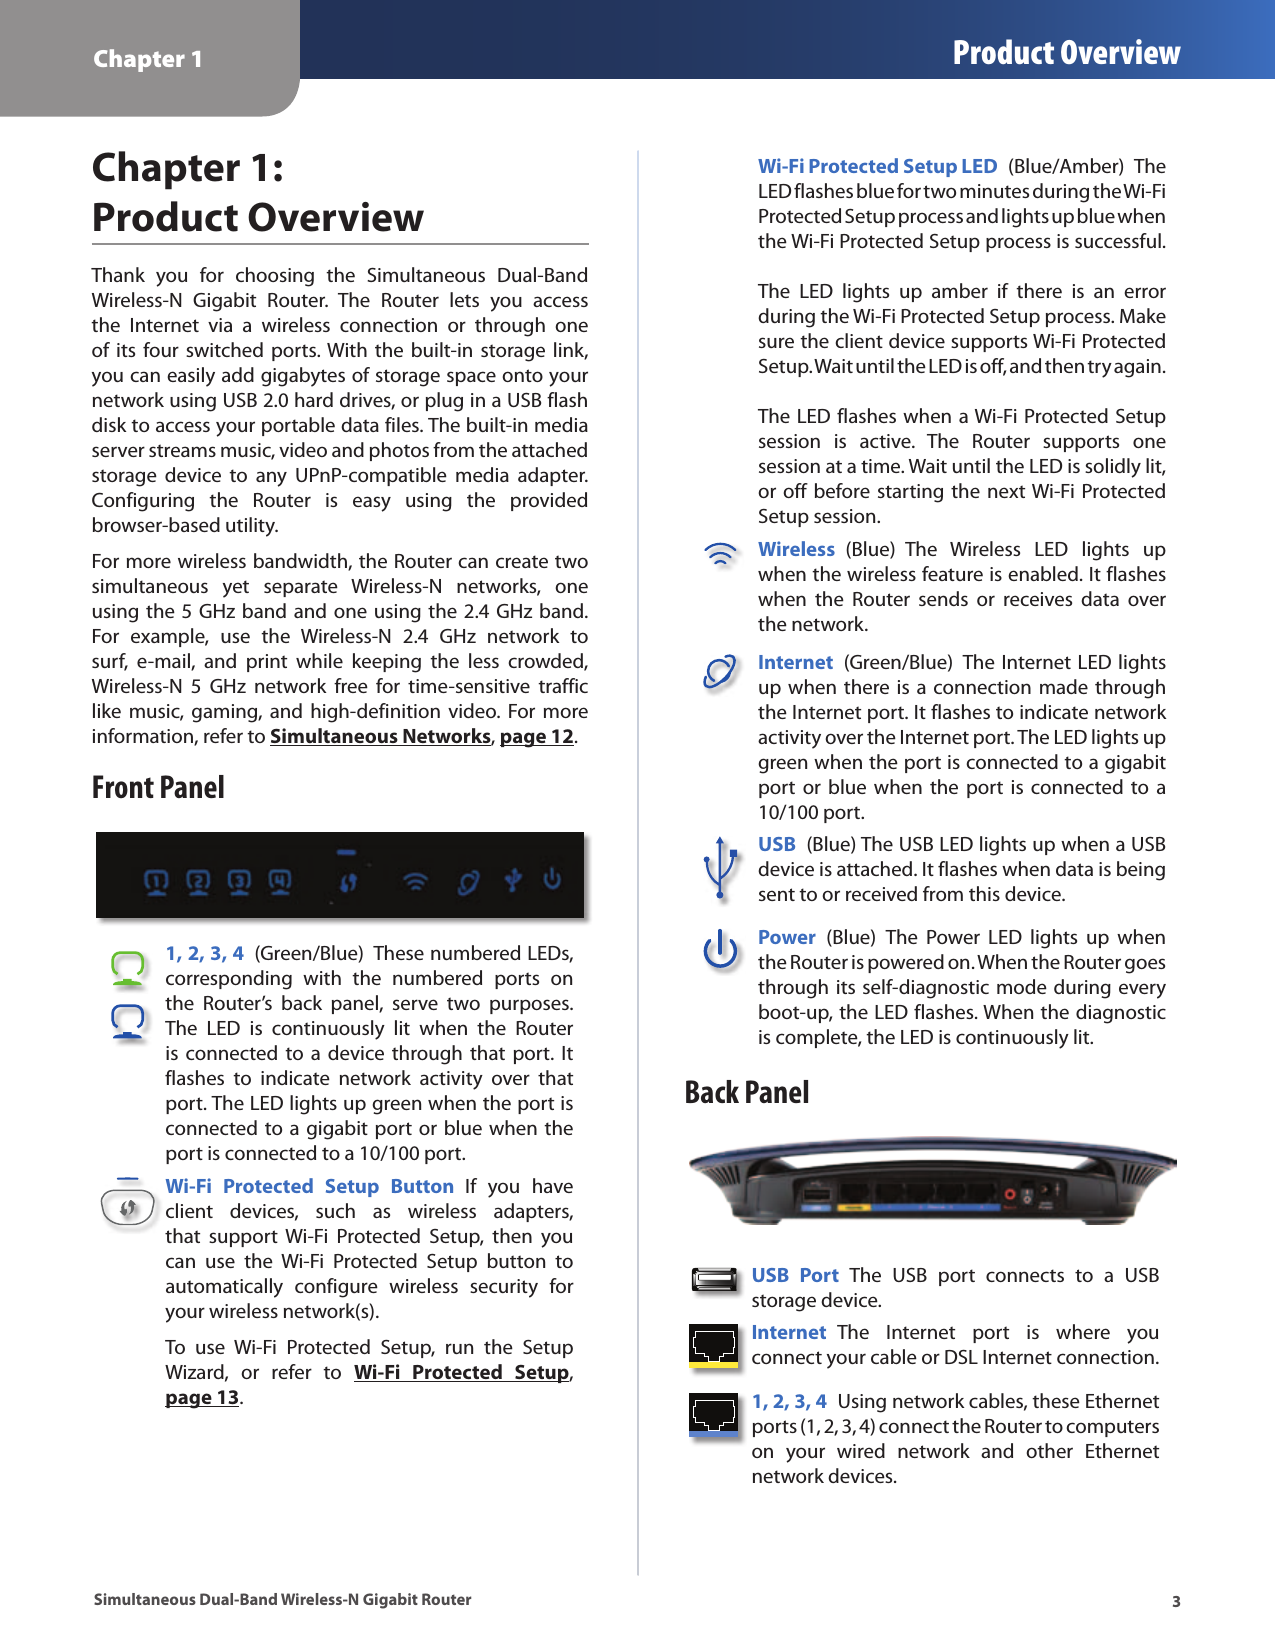 Chapter 1 Product Overview3Simultaneous Dual-Band Wireless-N Gigabit RouterChapter 1:  Product OverviewThank  you  for  choosing  the  Simultaneous  Dual-Band Wireless-N  Gigabit  Router.  The  Router  lets  you  access the  Internet  via  a  wireless  connection  or  through  one of its  four switched  ports. With the  built-in  storage  link, you can easily add gigabytes of storage space onto your network using USB 2.0 hard drives, or plug in a USB flash disk to access your portable data files. The built-in media server streams music, video and photos from the attached storage  device  to  any  UPnP-compatible  media  adapter. Configuring  the  Router  is  easy  using  the  provided browser-based utility.For more wireless bandwidth, the Router can create two simultaneous  yet  separate  Wireless-N  networks,  one using the 5 GHz band and one using the 2.4 GHz band. For  example,  use  the  Wireless-N  2.4  GHz  network  to surf,  e-mail,  and  print  while  keeping  the  less  crowded, Wireless-N  5  GHz  network  free  for  time-sensitive  traffic like  music,  gaming,  and high-definition  video.  For more information, refer to Simultaneous Networks, page 12.Front Panel1, 2, 3, 4  (Green/Blue)  These numbered LEDs, corresponding  with  the  numbered  ports  on the  Router’s  back  panel,  serve  two  purposes. The  LED  is  continuously  lit  when  the  Router is connected  to a device  through  that port.  It flashes  to  indicate  network  activity  over  that port. The LED lights up green when the port is connected to a gigabit port or blue when the port is connected to a 10/100 port. Wi-Fi  Protected  Setup  Button  If  you  have client  devices,  such  as  wireless  adapters, that  support  Wi-Fi  Protected  Setup,  then  you can  use  the  Wi-Fi  Protected  Setup  button  to automatically  configure  wireless  security  for your wireless network(s).To  use  Wi-Fi  Protected  Setup,  run  the  Setup Wizard,  or  refer  to  Wi-Fi  Protected  Setup, page 13.Wi-Fi Protected Setup LED  (Blue/Amber)  The LED flashes blue for two minutes during the Wi-Fi Protected Setup process and lights up blue when the Wi-Fi Protected Setup process is successful.    The  LED  lights  up  amber  if  there  is  an  error during the Wi-Fi Protected Setup process. Make sure the client device supports Wi-Fi Protected Setup. Wait until the LED is off, and then try again.   The LED flashes when a Wi-Fi Protected Setup session  is  active.  The  Router  supports  one session at a time. Wait until the LED is solidly lit, or off before starting the next Wi-Fi Protected Setup session.Wireless  (Blue)  The  Wireless  LED  lights  up when the wireless feature is enabled. It flashes when  the  Router  sends  or  receives  data  over the network.Internet  (Green/Blue)  The Internet LED lights up when there is a connection made through the Internet port. It flashes to indicate network activity over the Internet port. The LED lights up green when the port is connected to a gigabit port  or blue  when the  port  is  connected to  a 10/100 port. USB  (Blue) The USB LED lights up when a USB device is attached. It flashes when data is being sent to or received from this device.Power  (Blue)  The  Power  LED  lights  up  when the Router is powered on. When the Router goes through its self-diagnostic mode during every boot-up, the LED flashes. When the diagnostic is complete, the LED is continuously lit.Back PanelUSB  Port  The  USB  port  connects  to  a  USB storage device. Internet  The  Internet  port  is  where  you connect your cable or DSL Internet connection. 1, 2, 3, 4  Using network cables, these Ethernet ports (1, 2, 3, 4) connect the Router to computers on  your  wired  network  and  other  Ethernet network devices. 